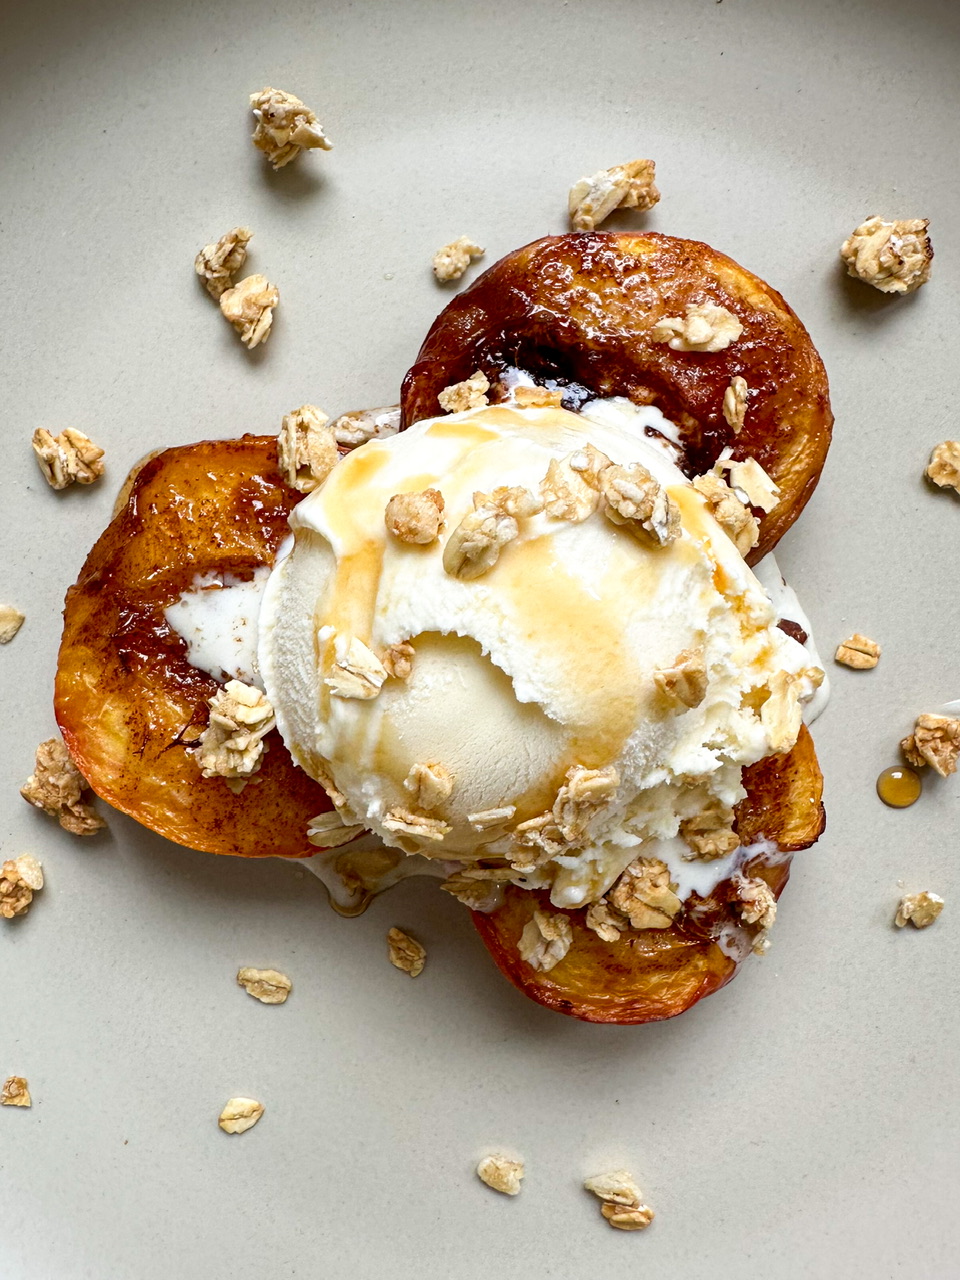 Air Fryer Peaches with Cinnamon Sugar Butter, Vanilla Ice Cream. Granola. and Maple Syrup